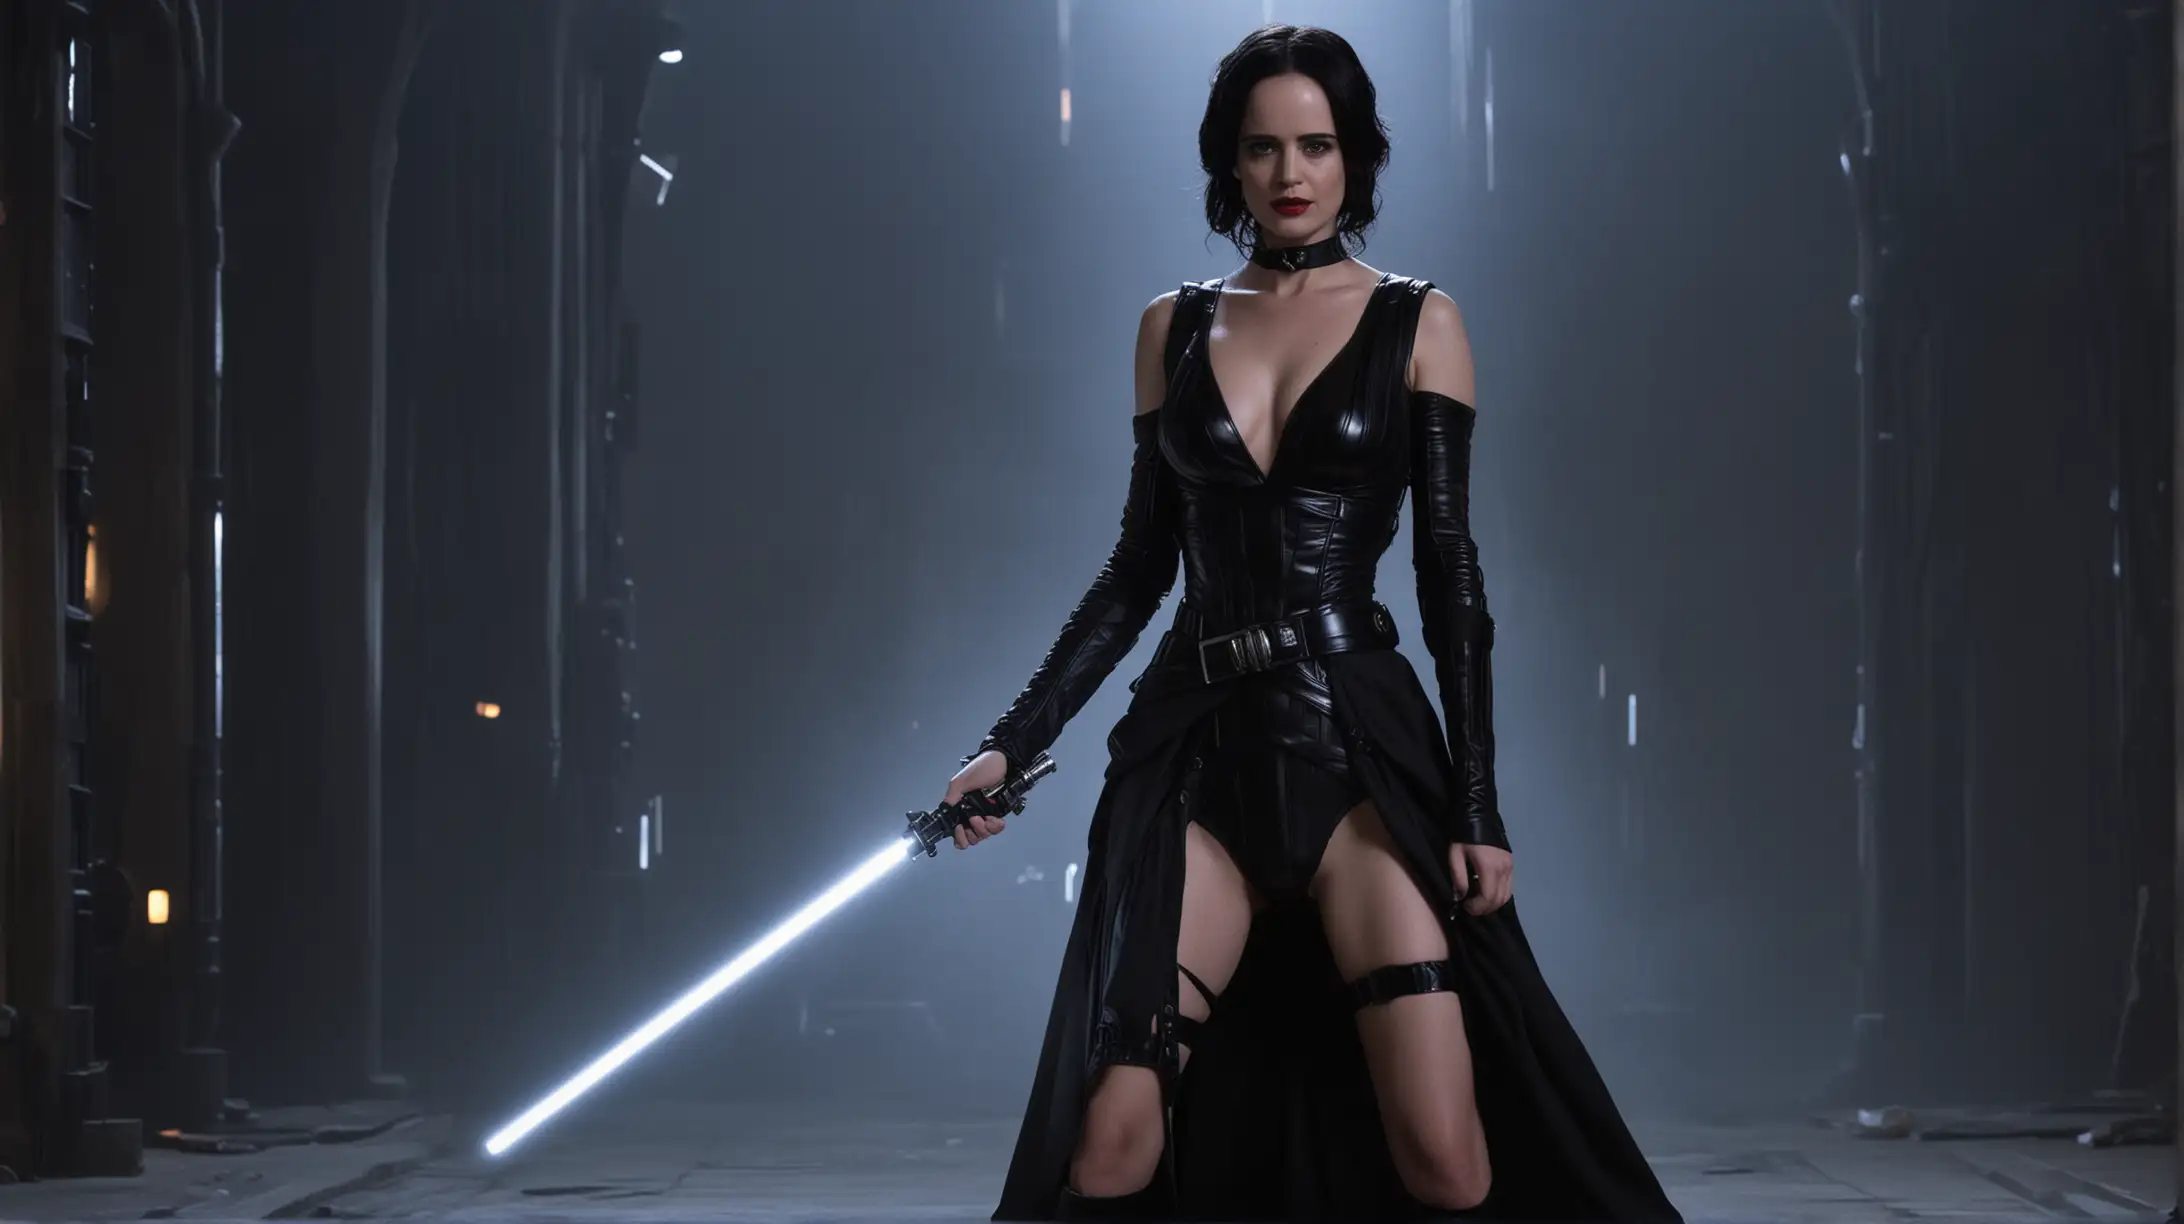 Eva Green as Sith Queen, sexy black and canary clothers, alone, lightsaber